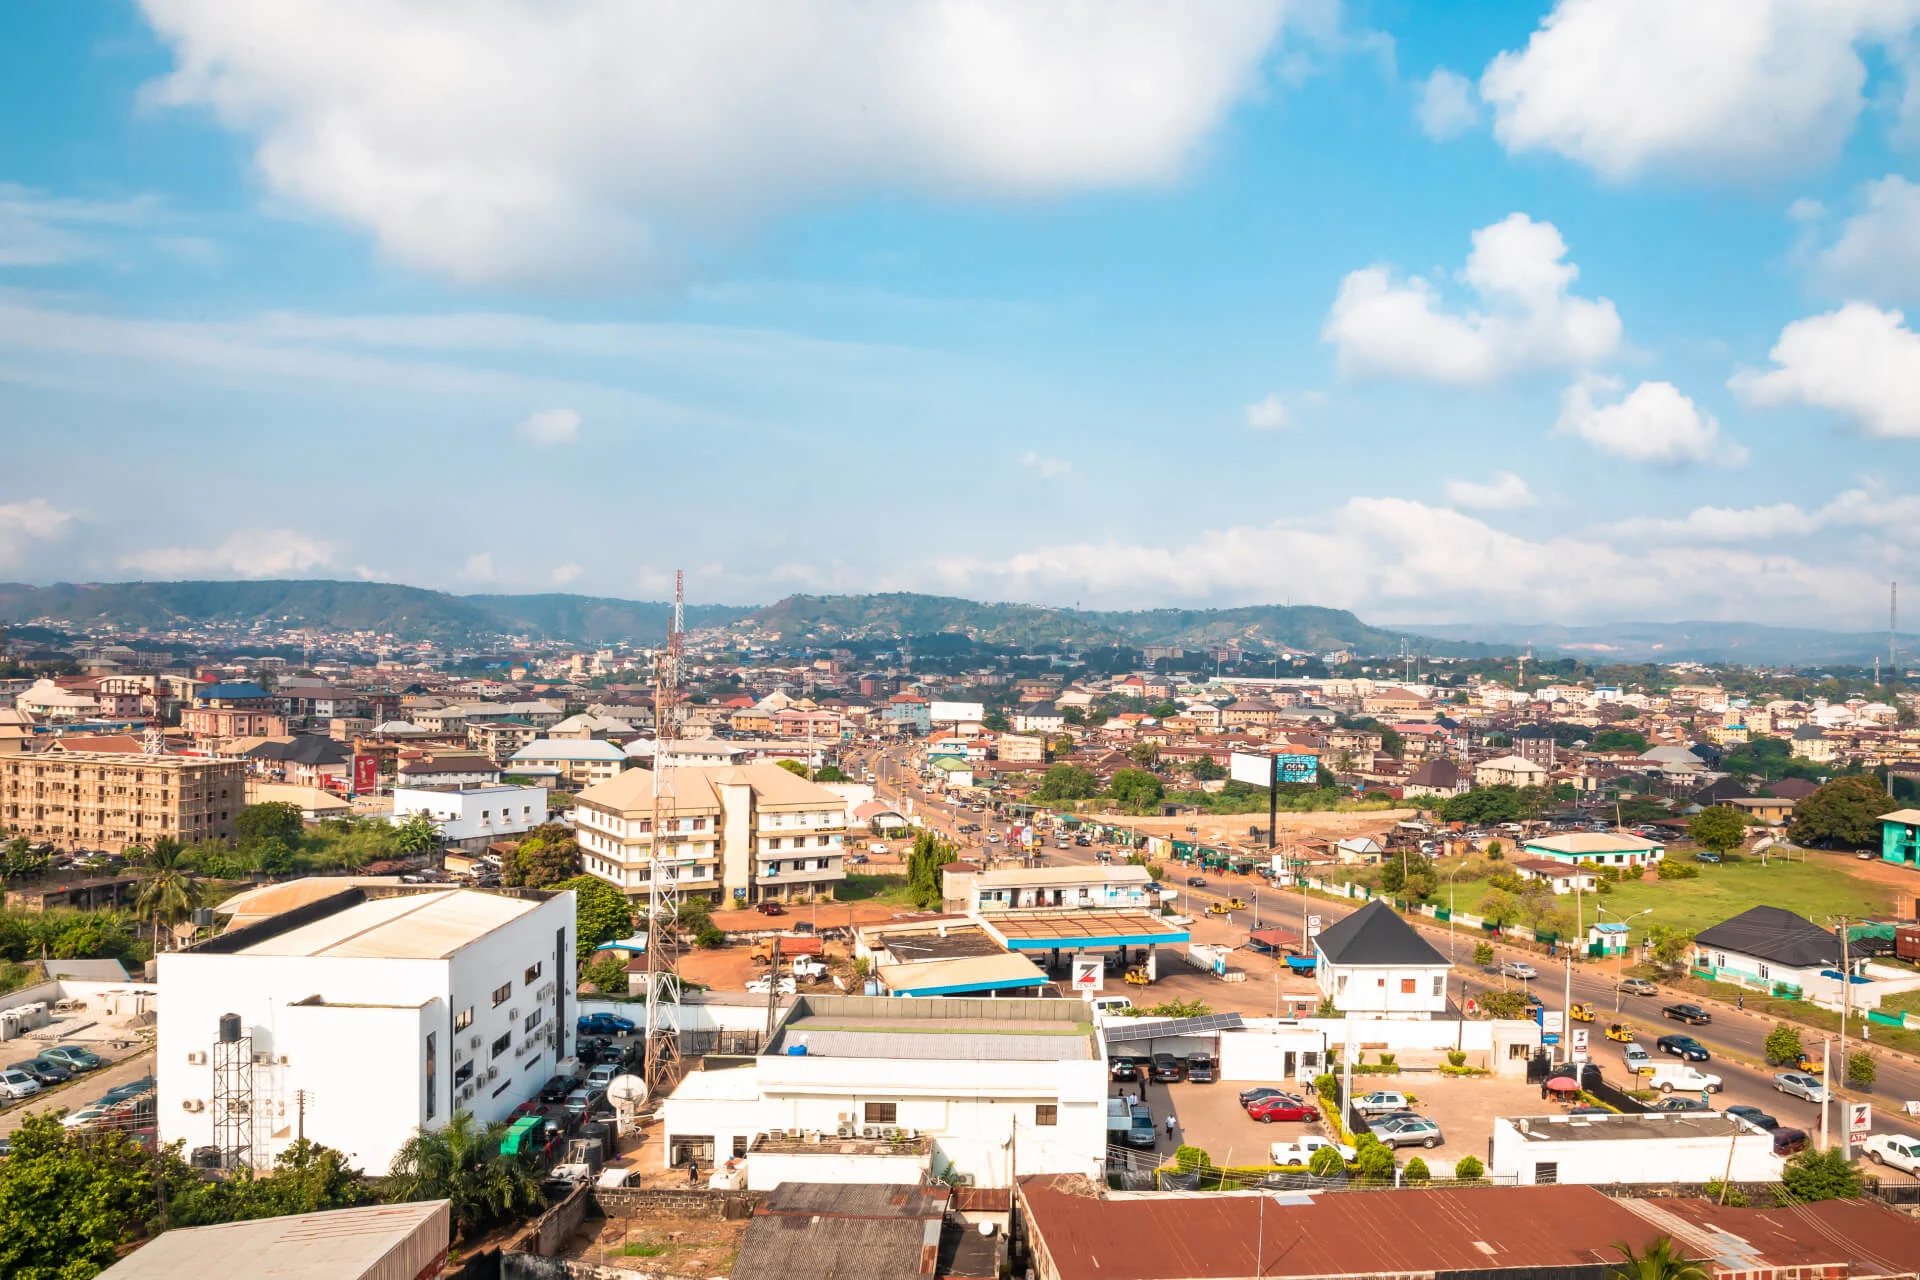 An aerial view of a city in ghana.